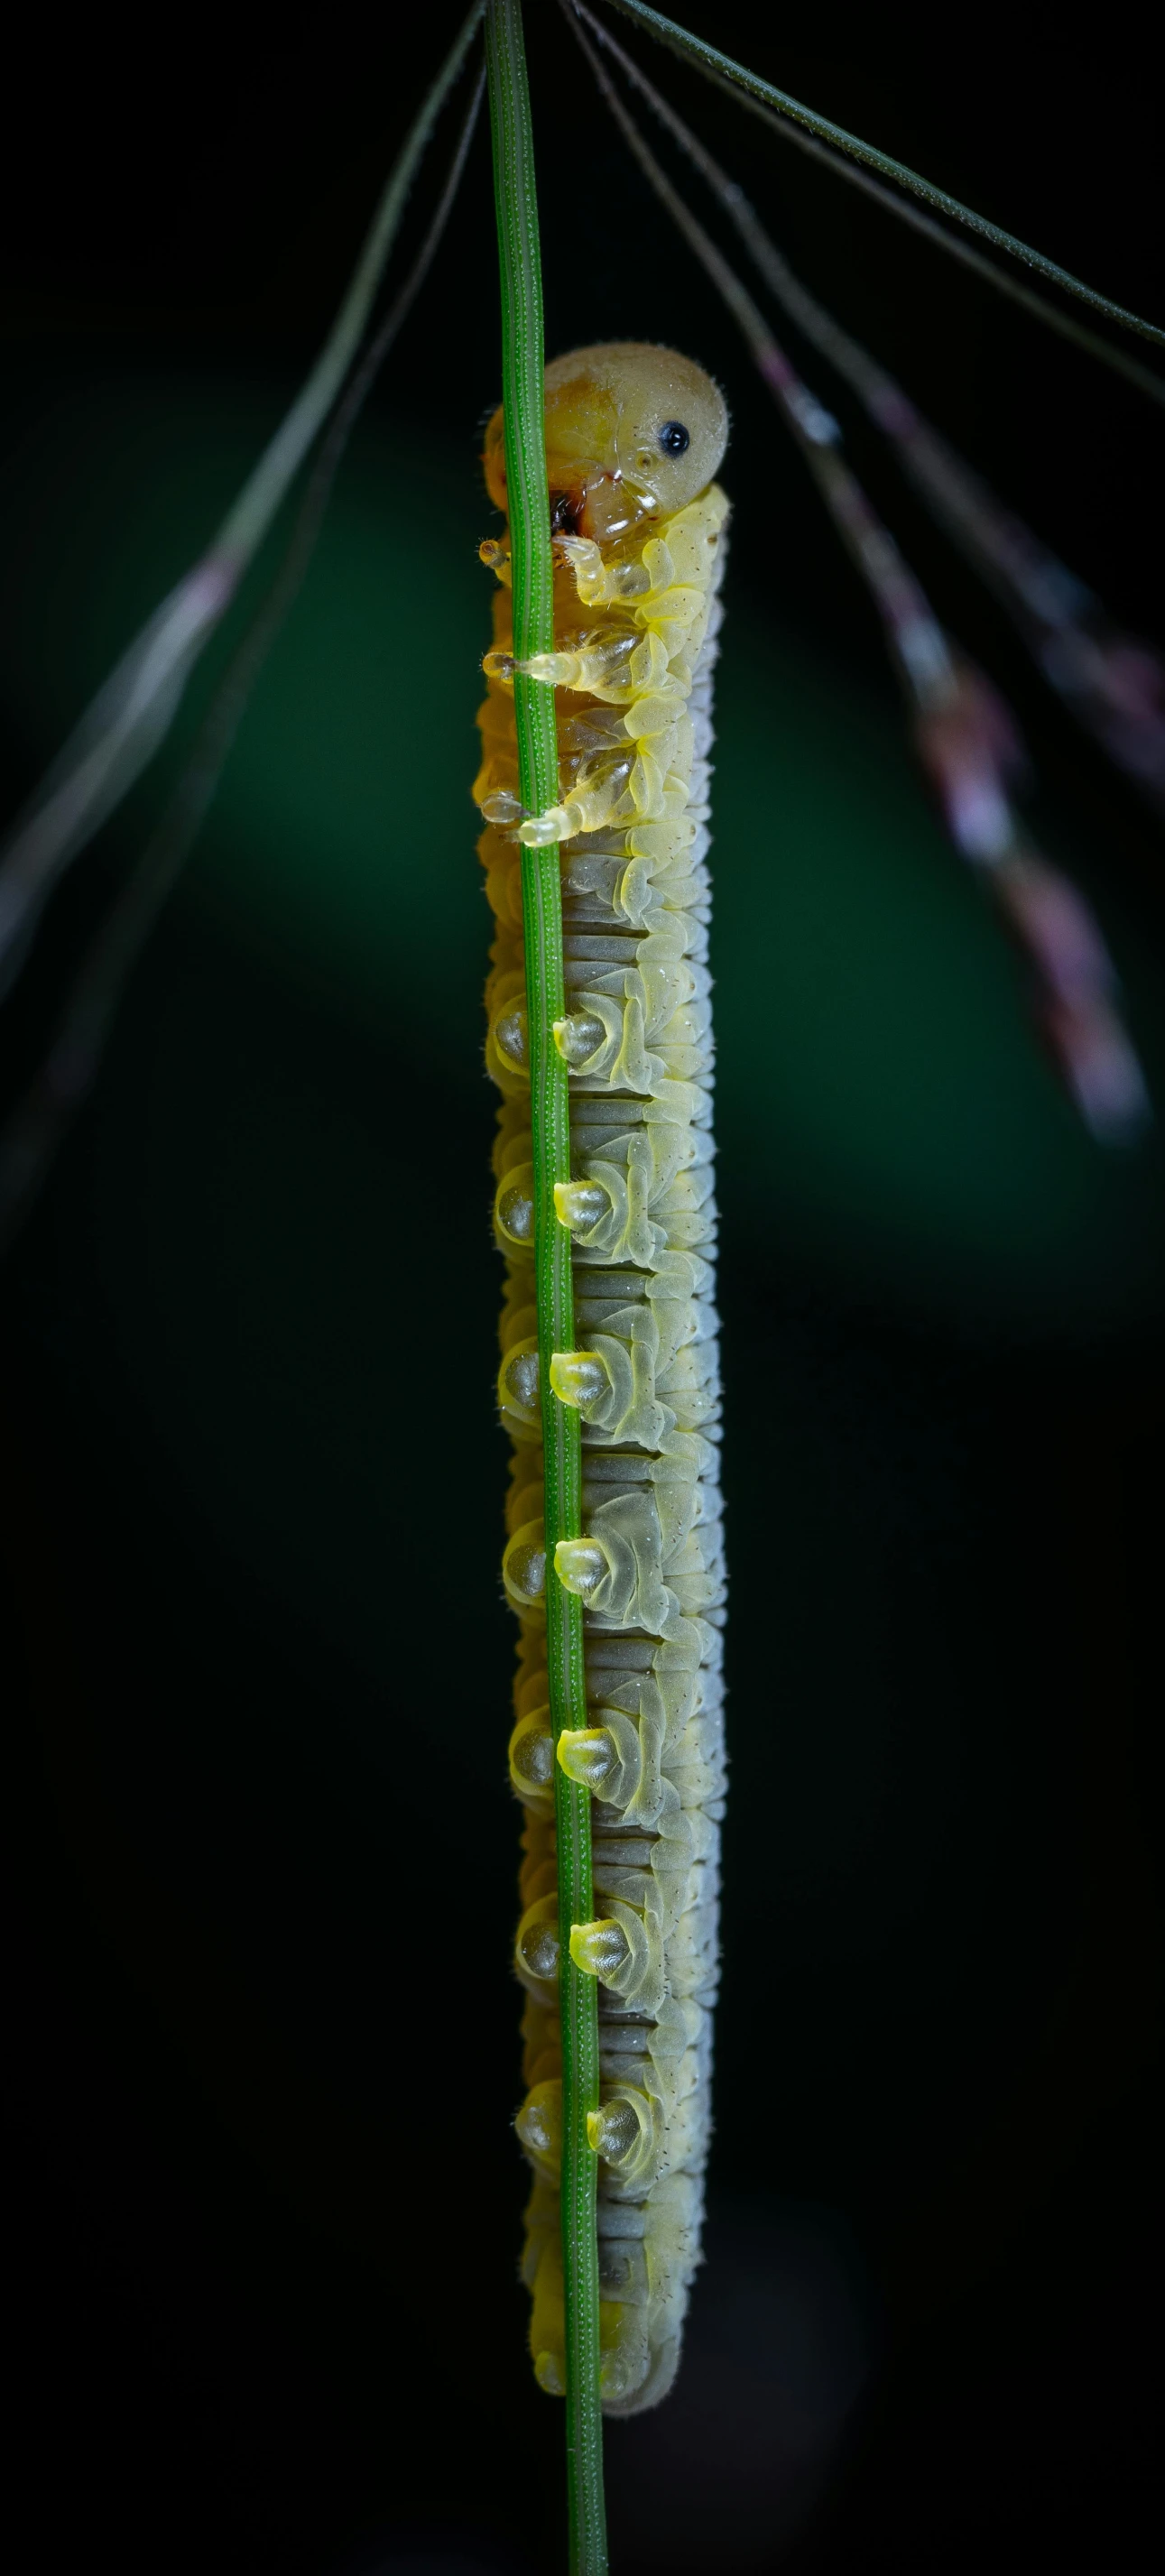 a cater that is sitting on top of a plant, a macro photograph, by Robert Brackman, unsplash, hurufiyya, high detailed thin stalagtites, cane, seahorse, soft light - n 9